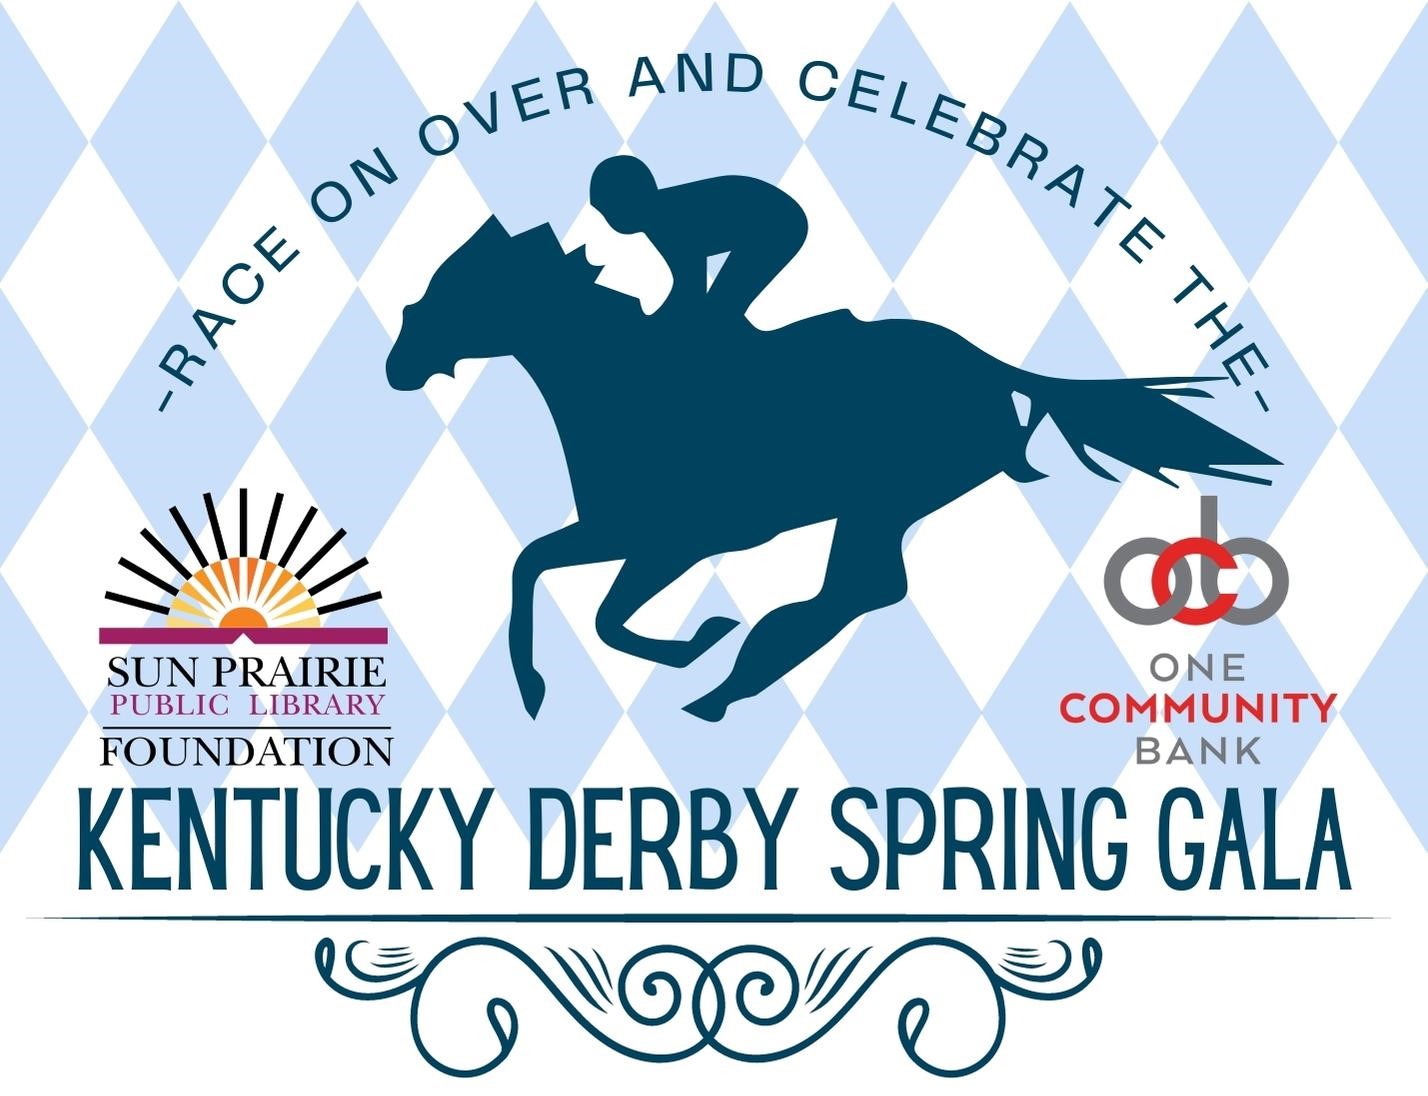 A graphic of a man riding a horse promoting the Kentucky Derby Spring Gala